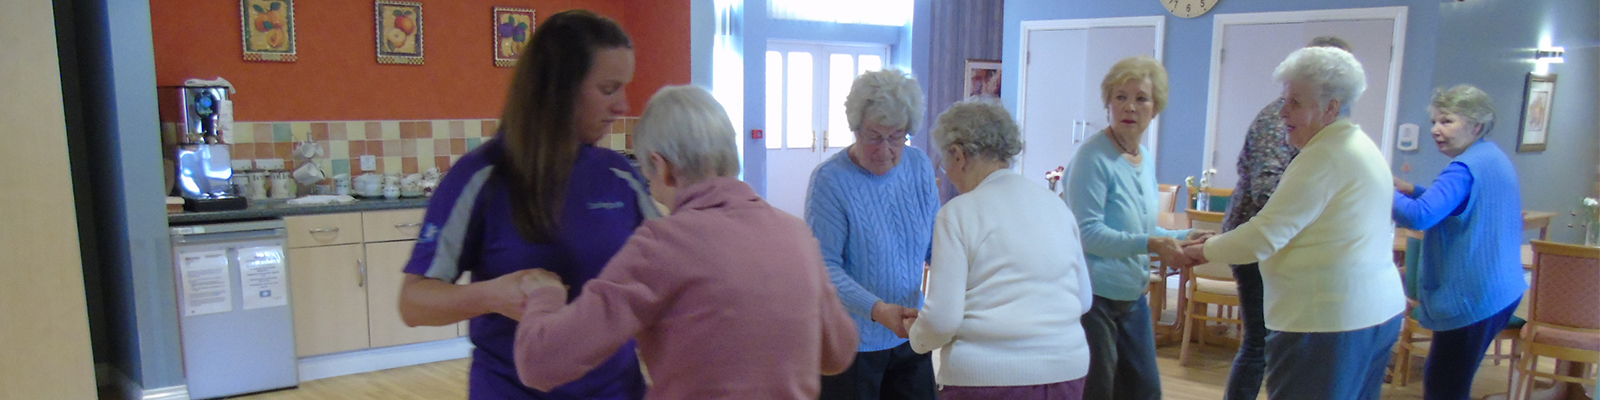 Residents dancing at Linden Court